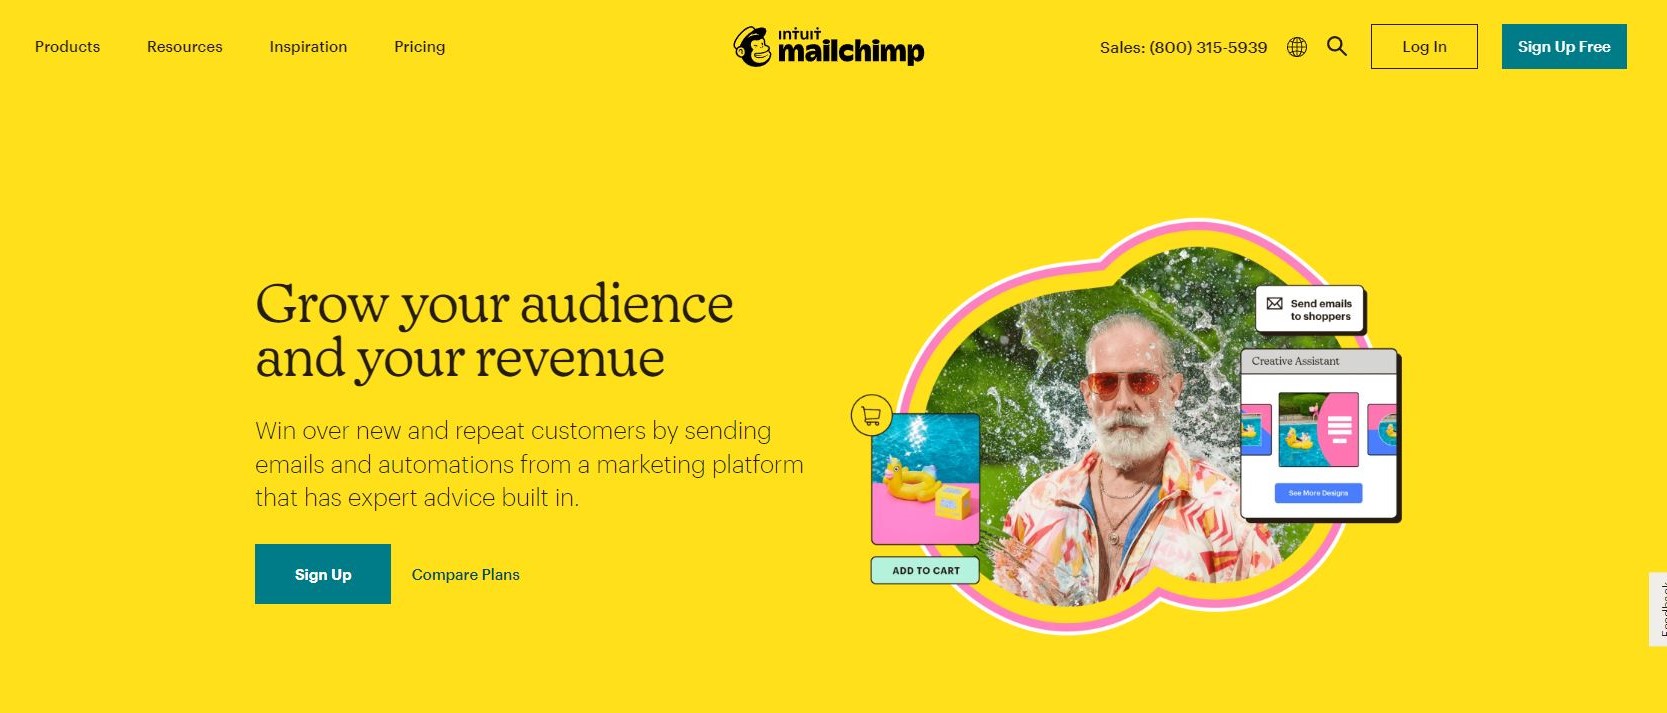 Mailchimp Review: Pros & Cons, Features, Ratings, Pricing and more |  TechRadar